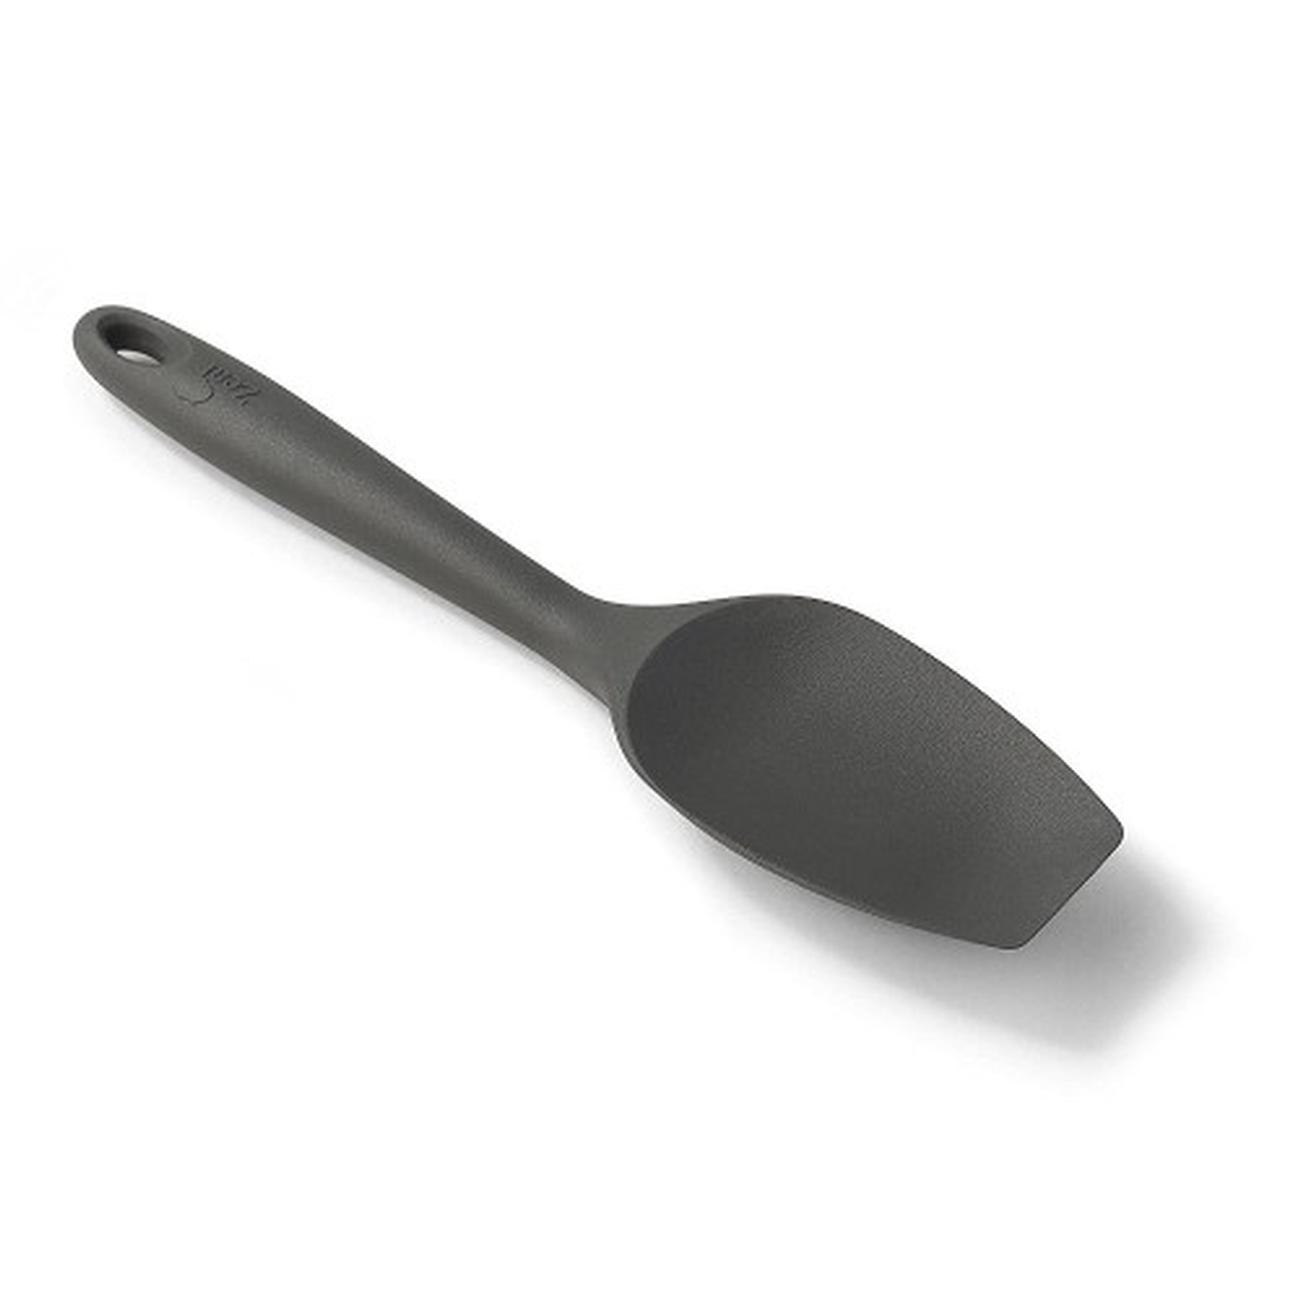 zeal-silicone-spatula-spoon-small-grey - Zeal Silicone Spatula Spoon Small Grey